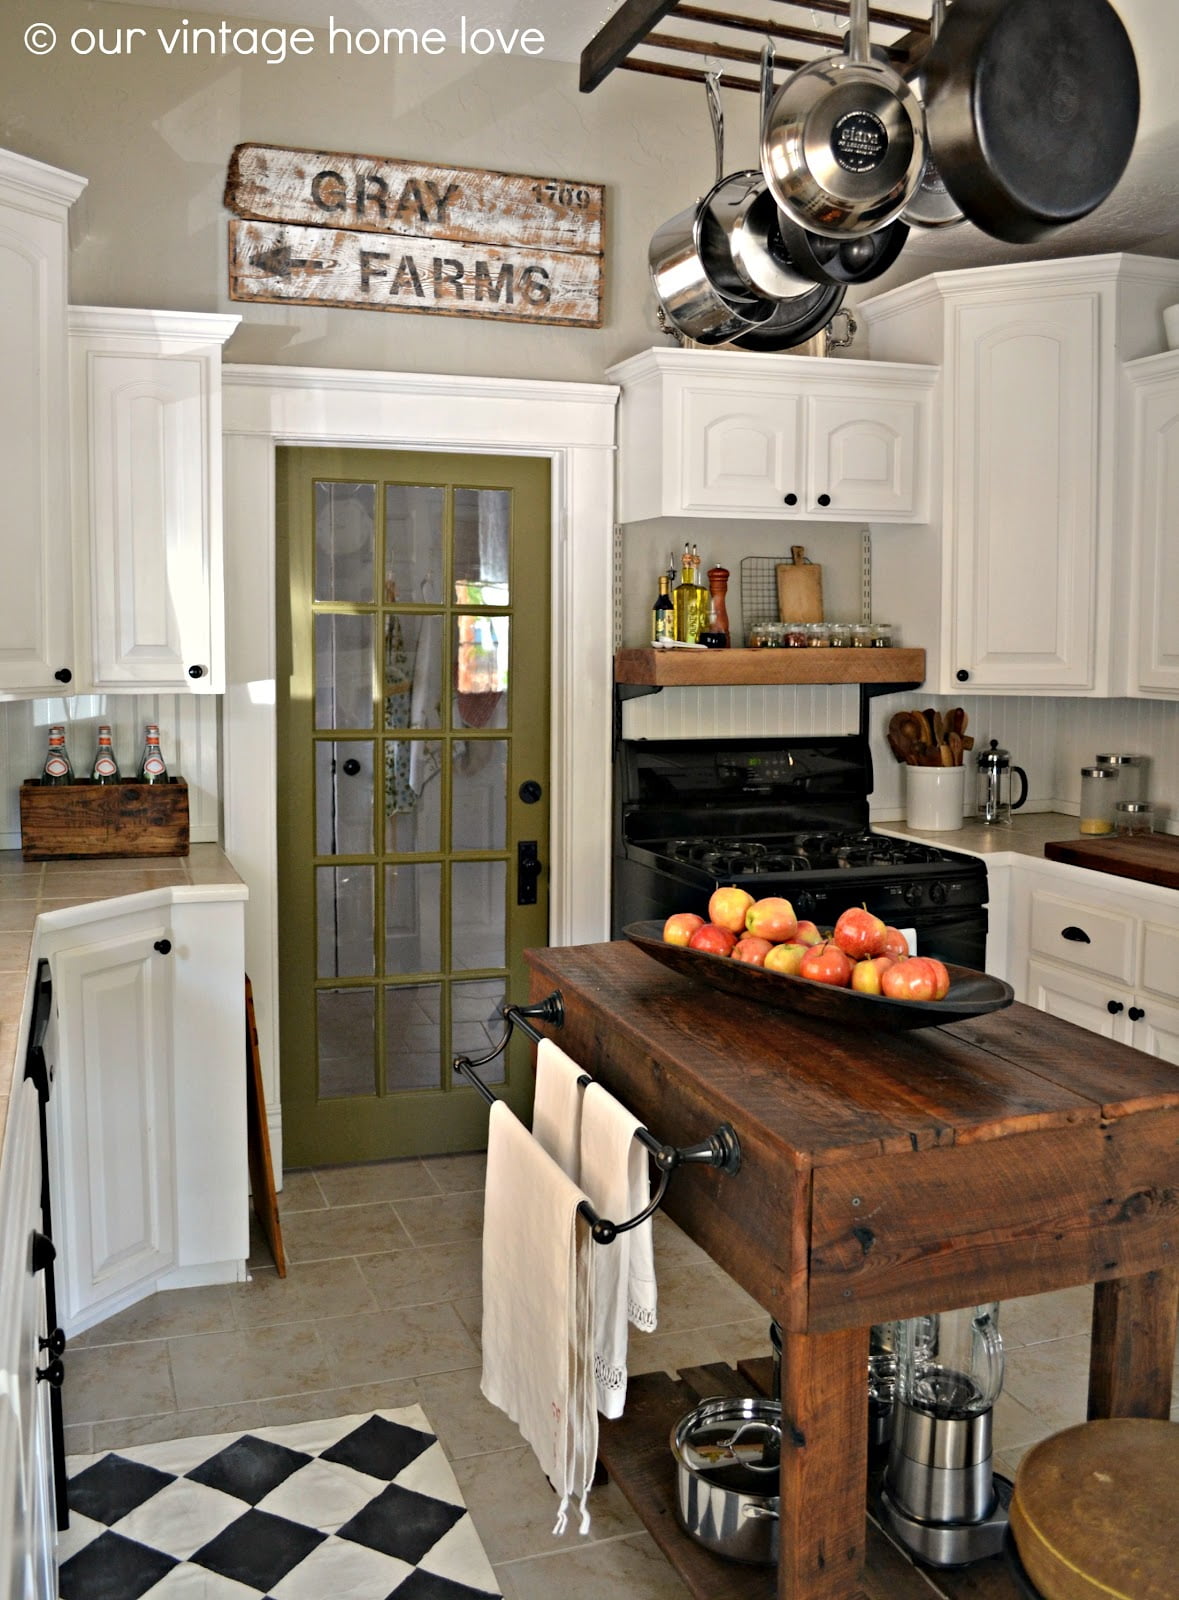 23 Best Rustic Country Kitchen Design Ideas and Decorations for 2016